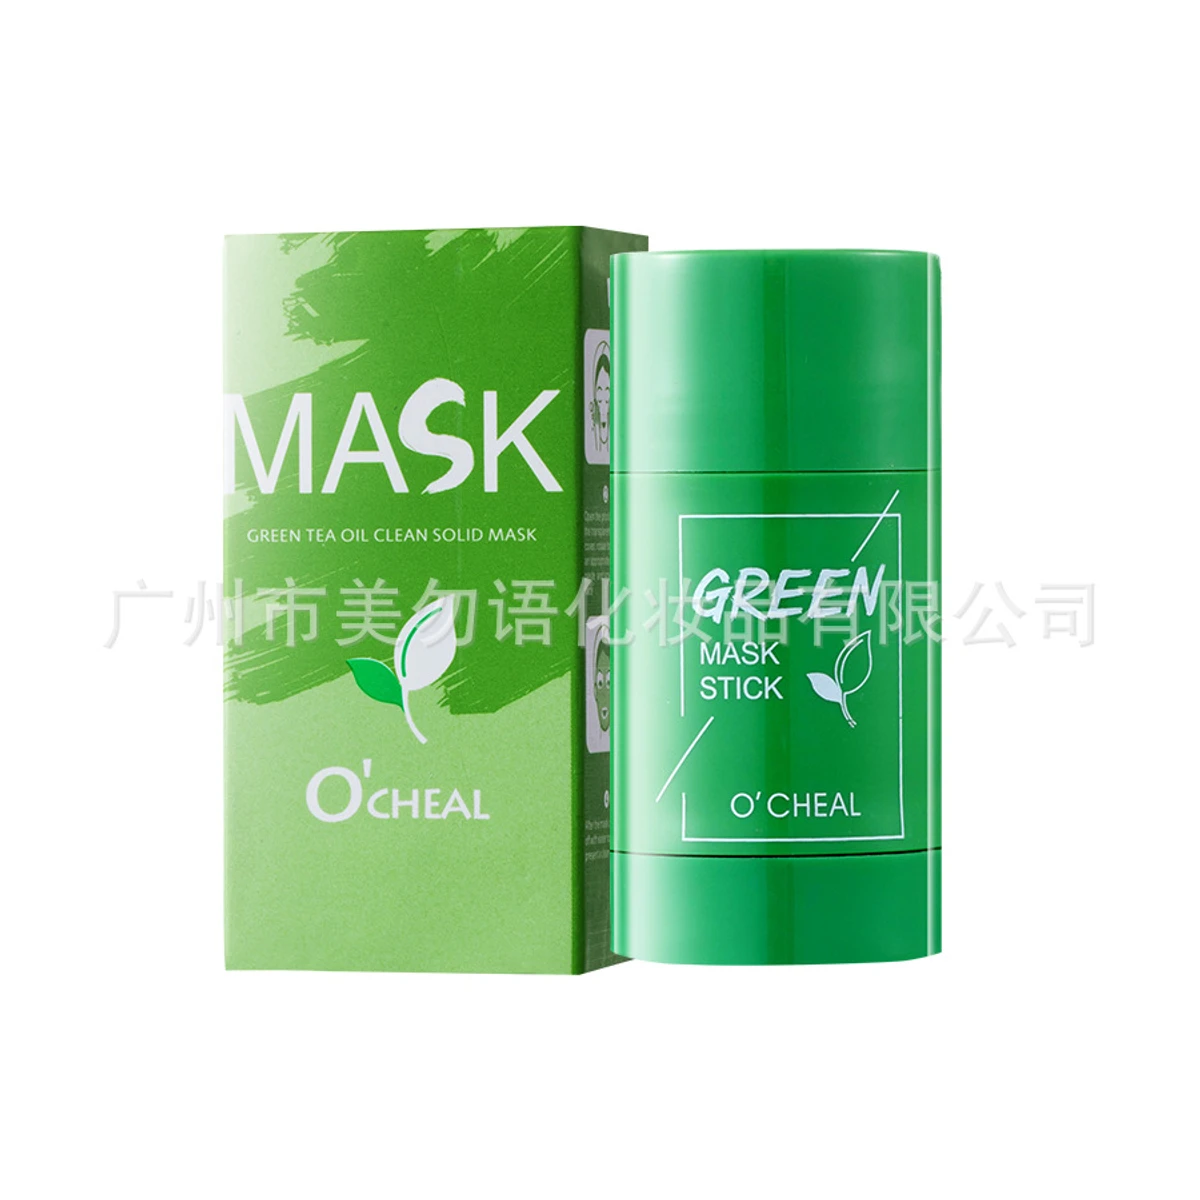 MASK Green Tea Solid Mask Stick Peach Cleanses Pores, Moisturizes Long Charcoal Eggplant Mud Mask, OCHEAL